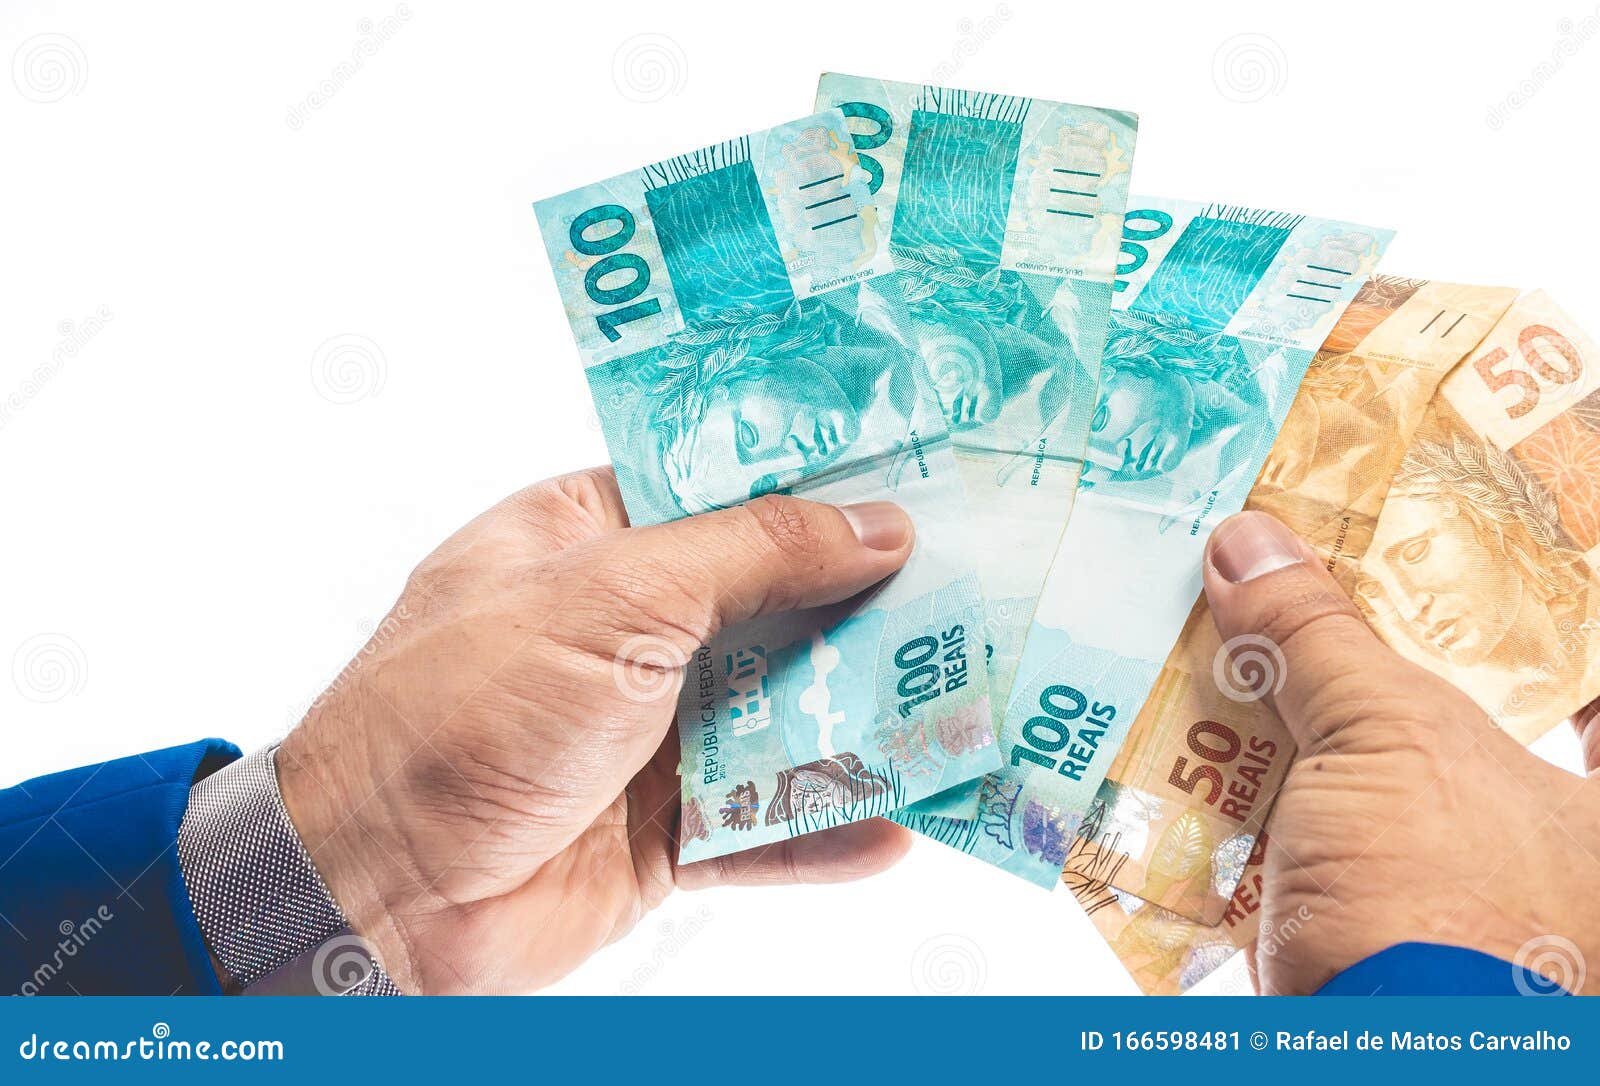 real - brazilian currency. man holding several money bills.